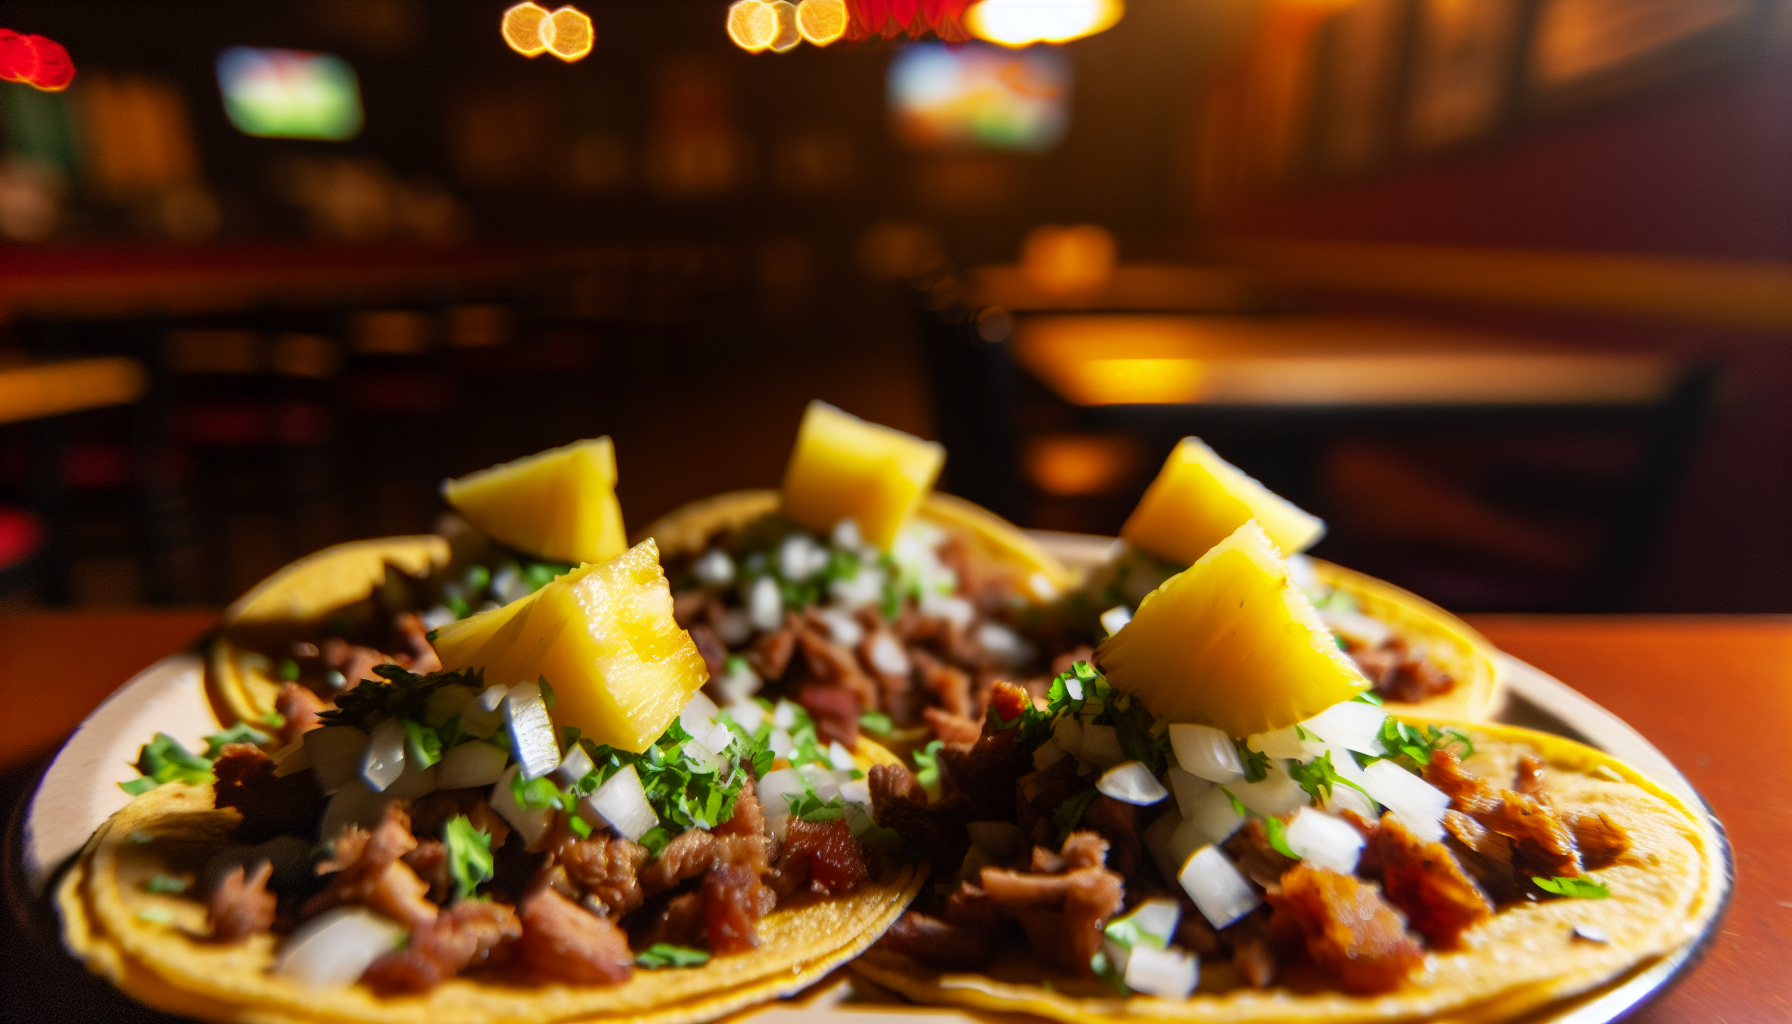 Tacos al pastor with traditional garnishes at No Name Taco Bar in Fort Lauderdale